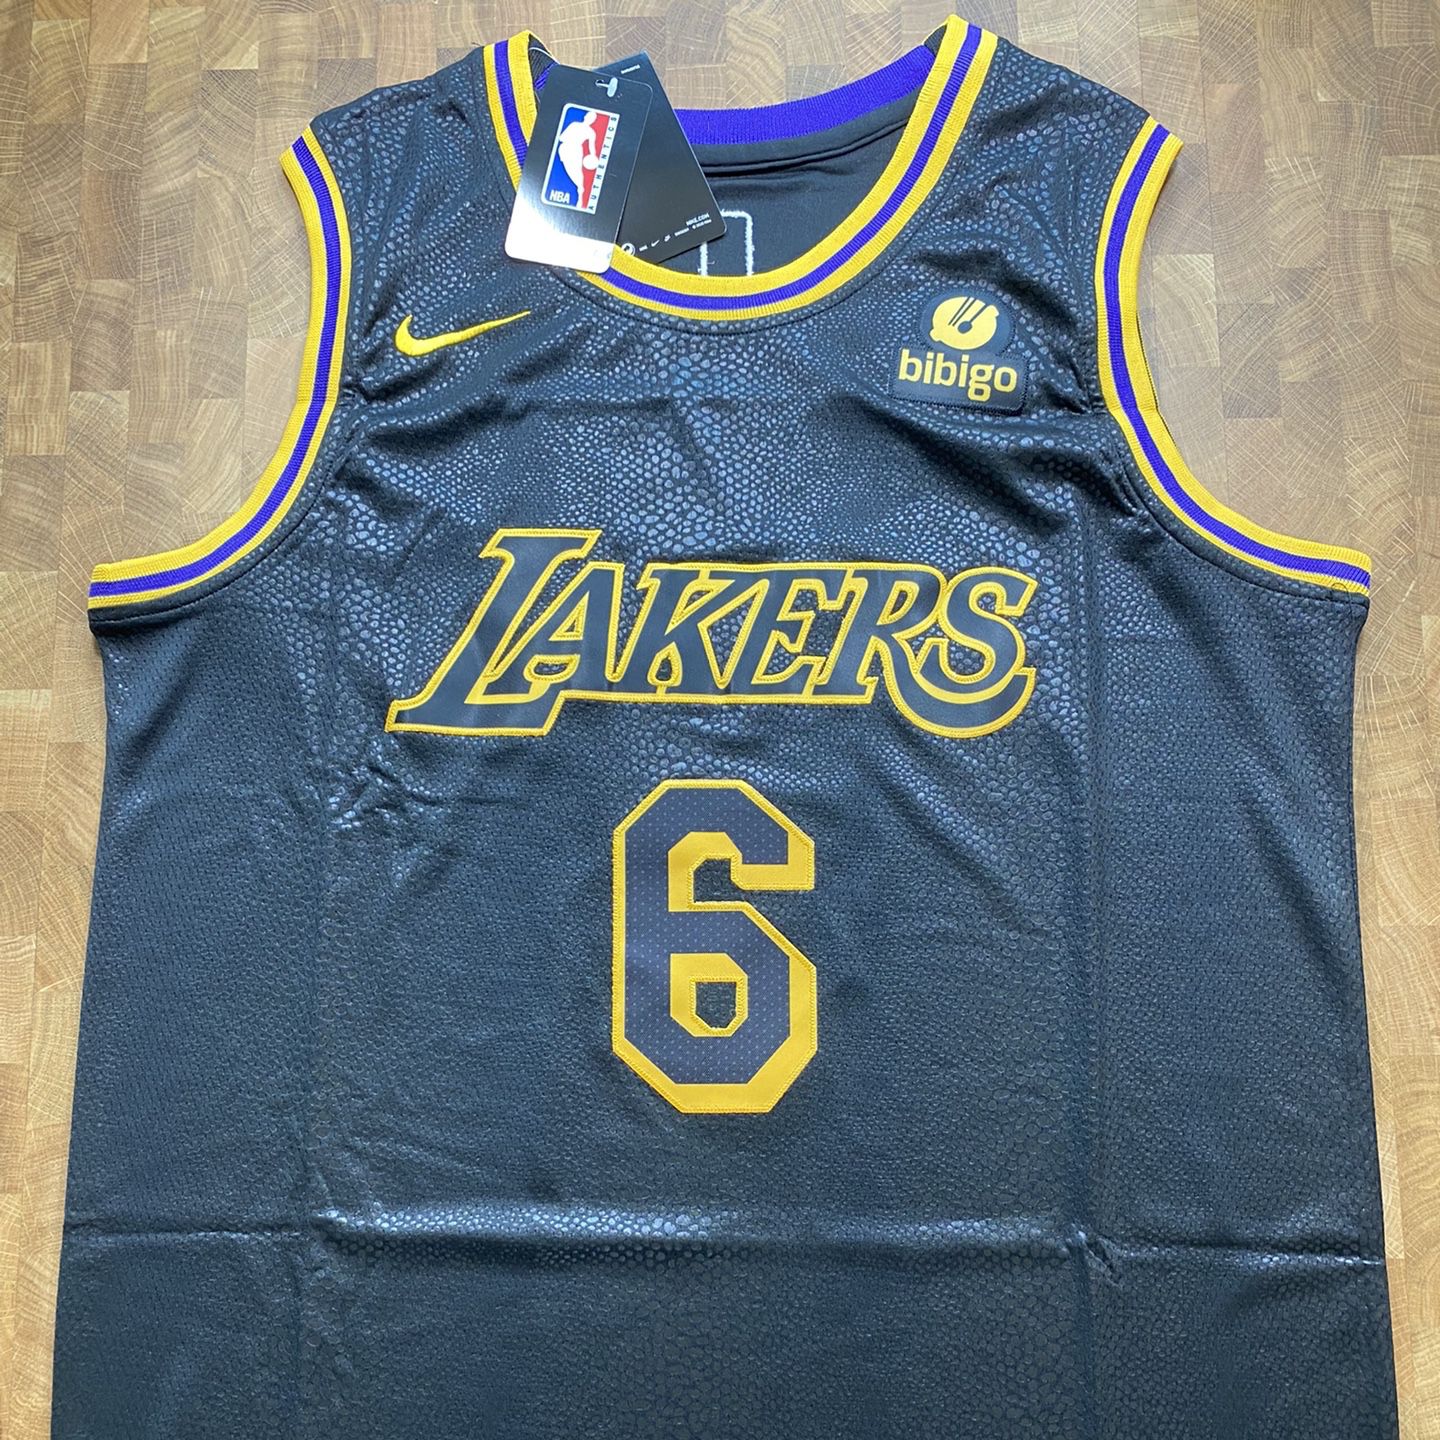 Men's Lebron James Nike Lakers Mamba Edition Snake Print Black NBA  Basketball Jersey. BRAND NEW! XXL for Sale in Los Angeles, CA - OfferUp